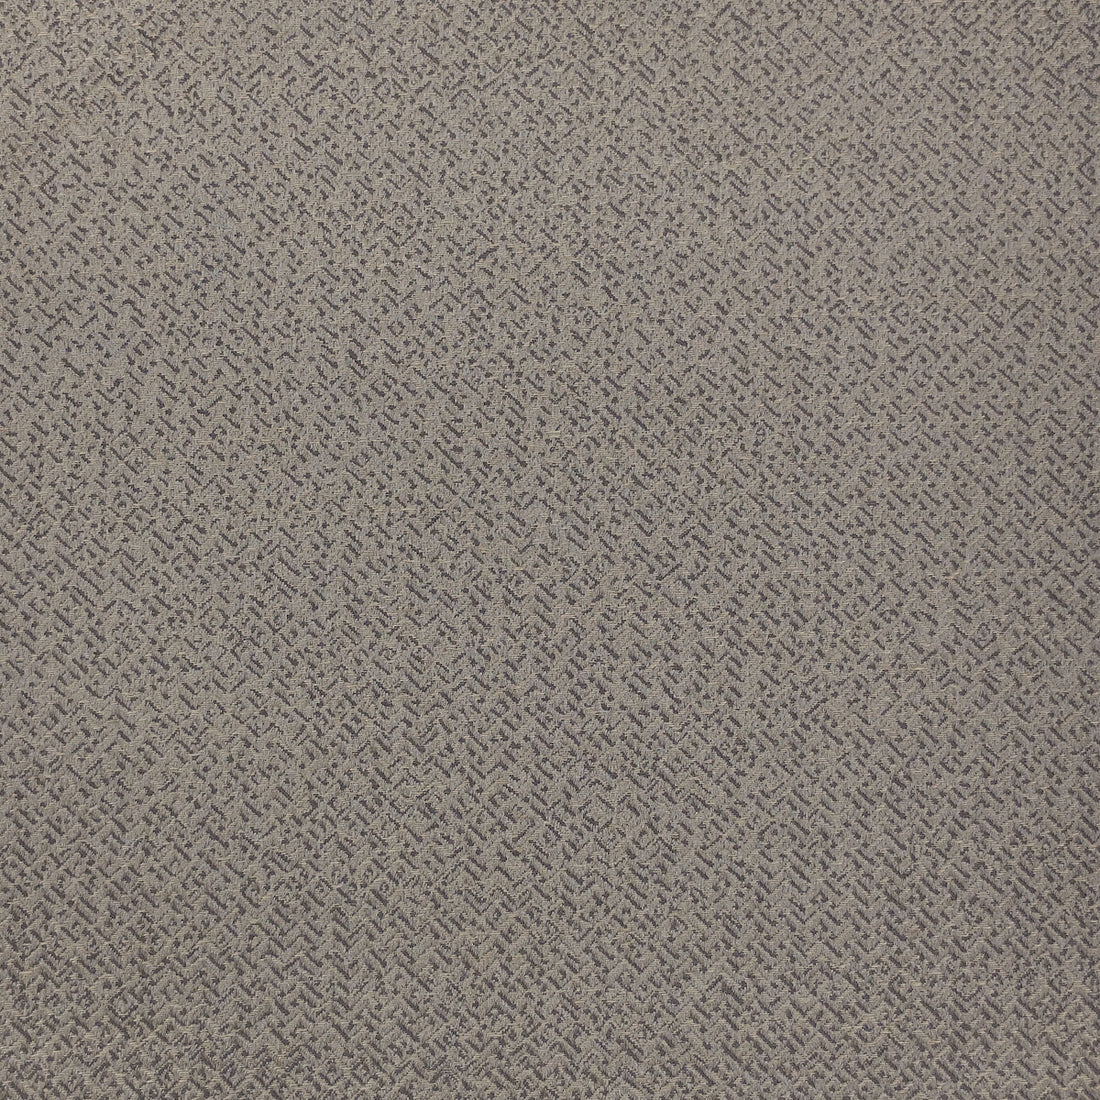 Kf Des fabric - pattern LZ-30203.06.0 - by Kravet Design in the Lizzo collection